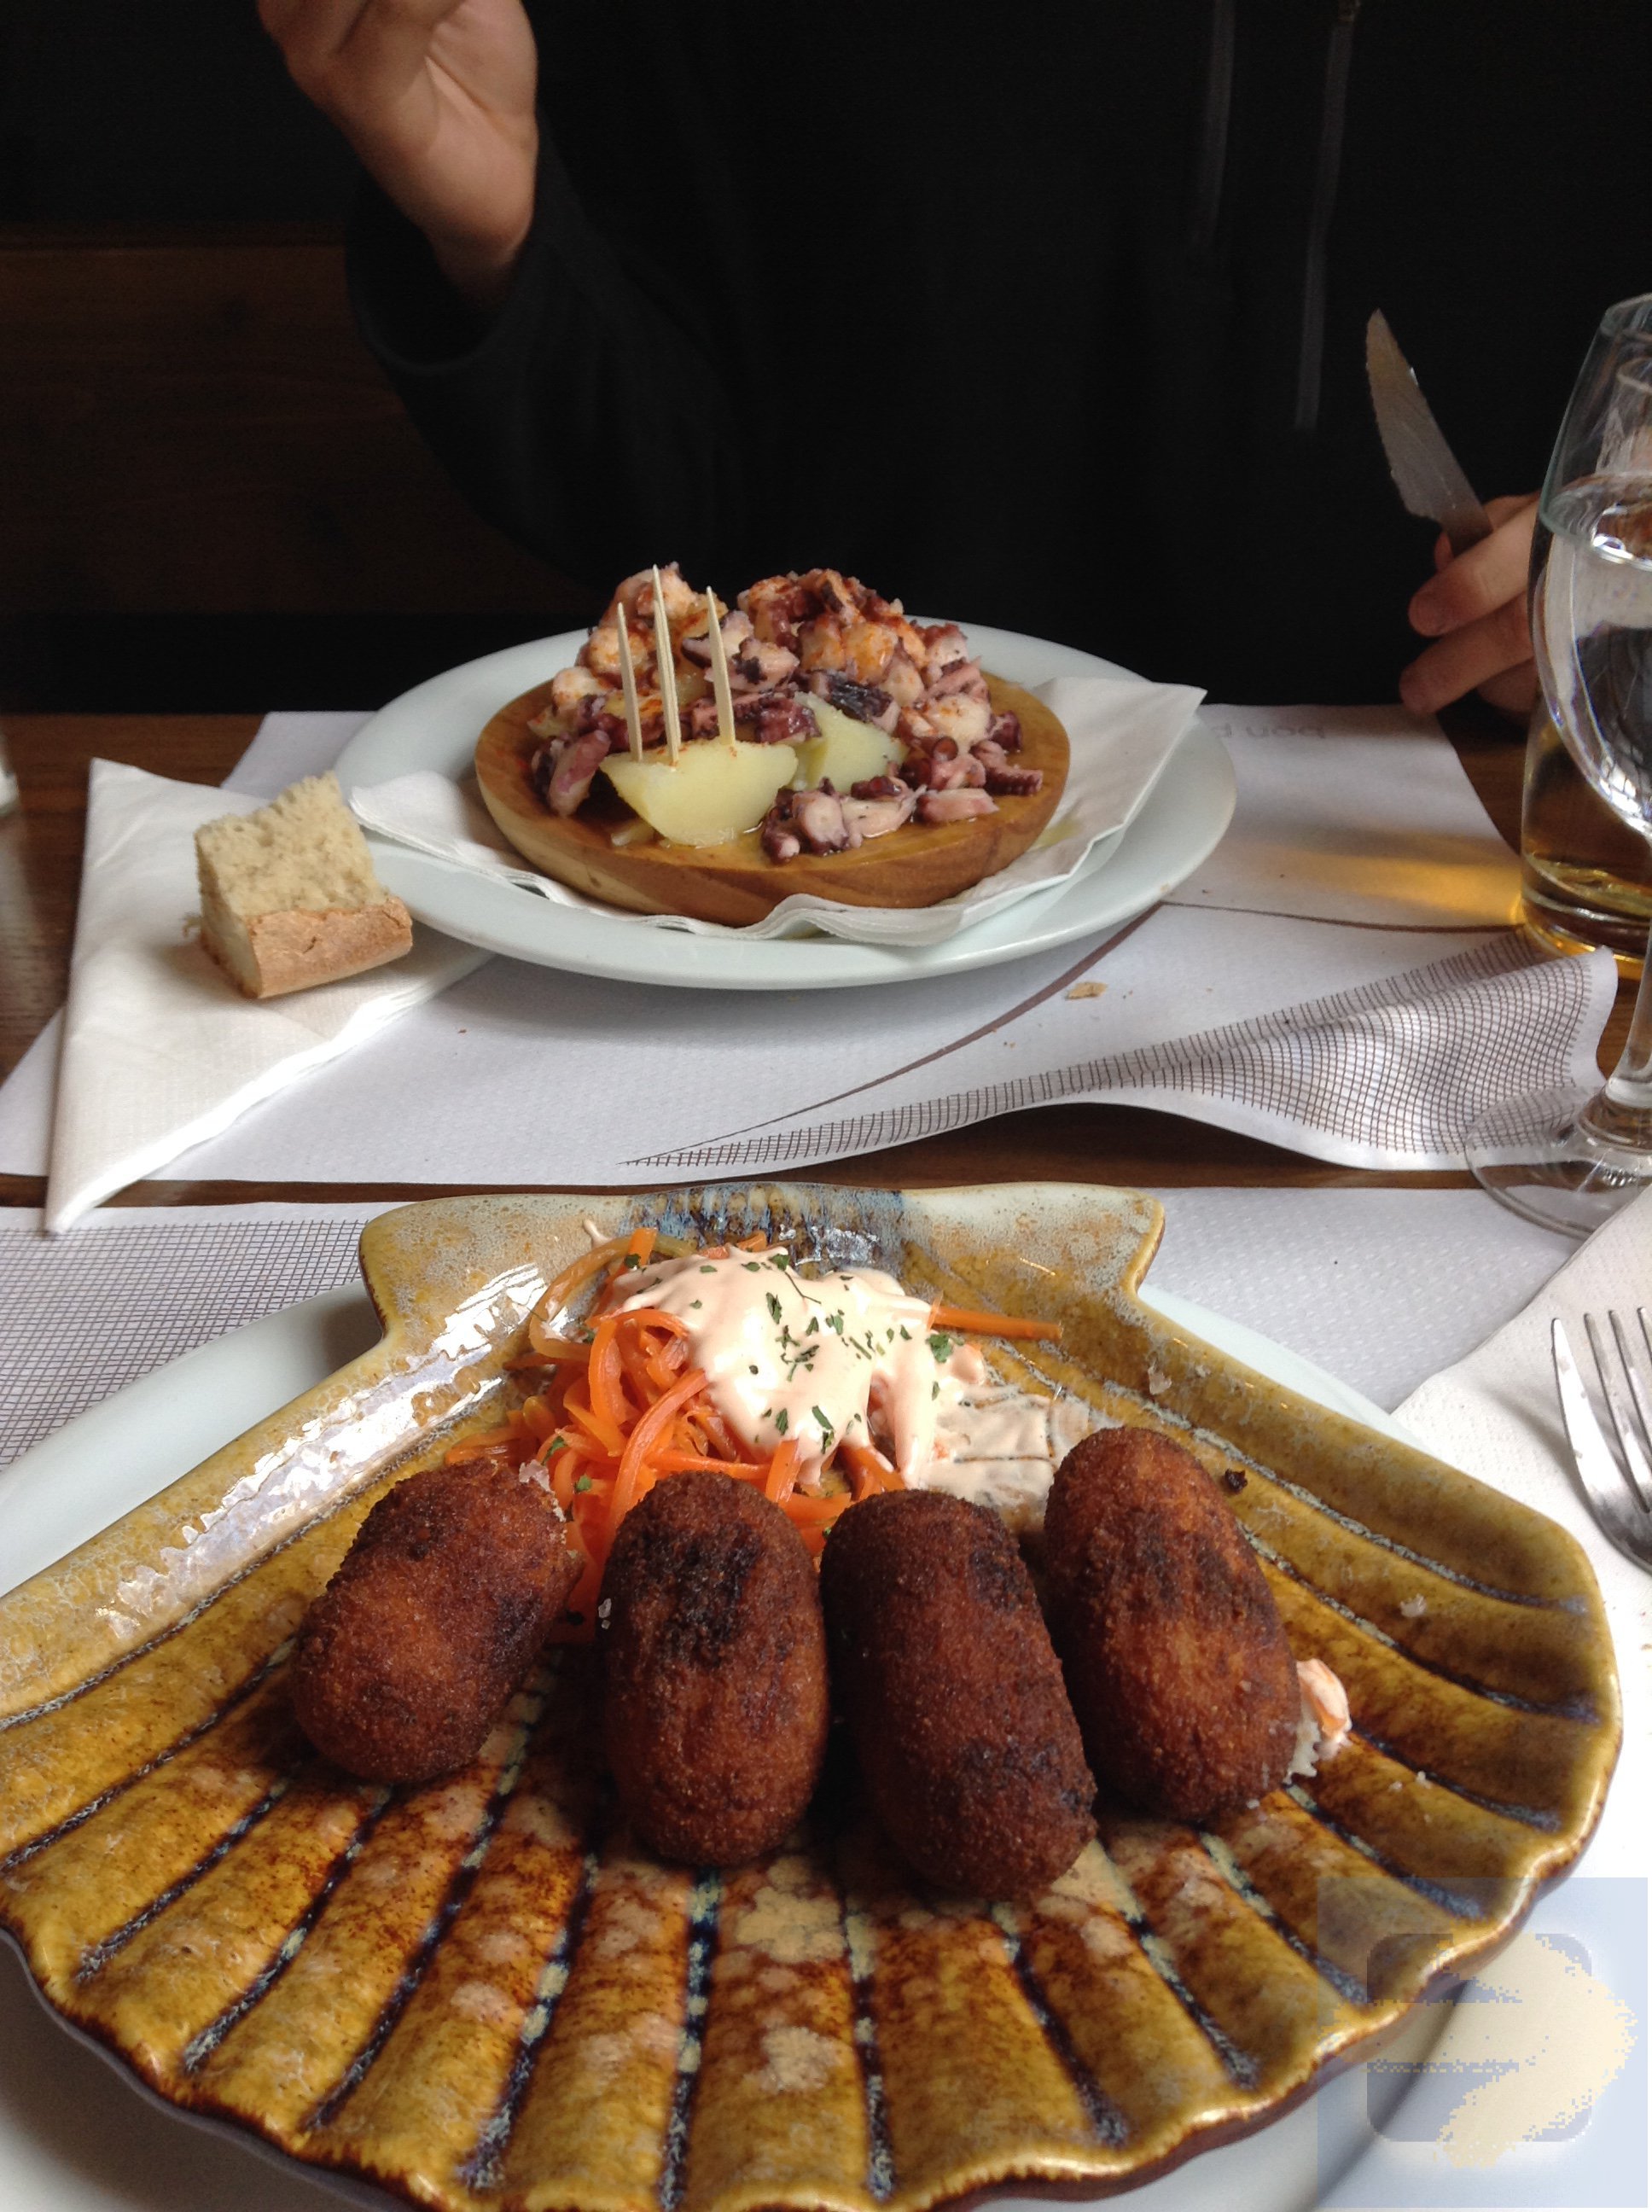 Samos, best croquettes of the entire Camino